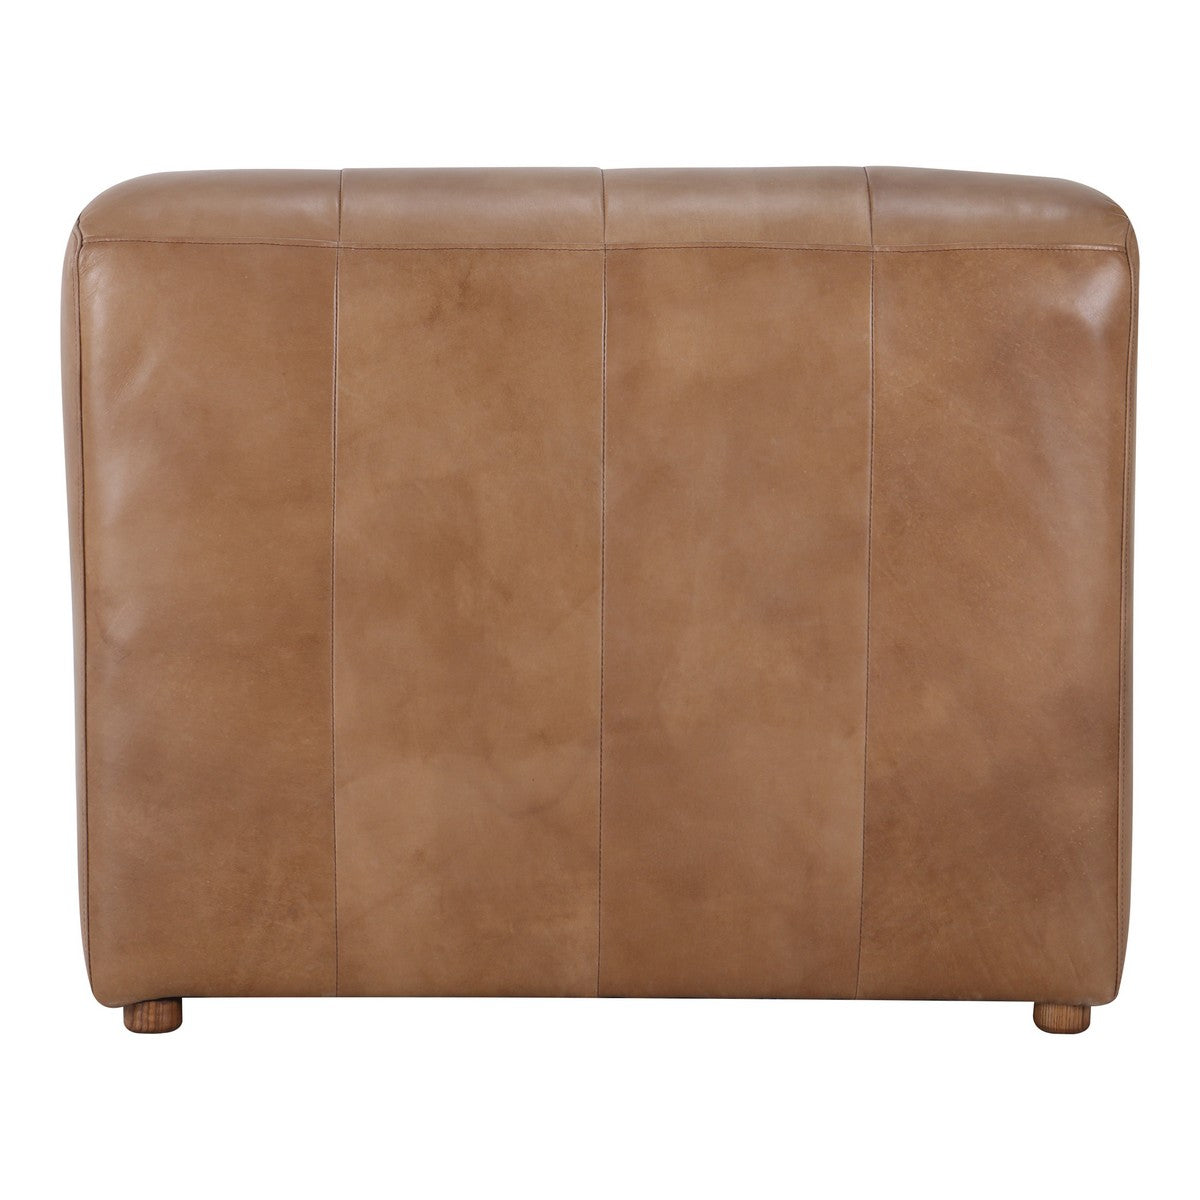 Moe's Home Collection Ramsay Leather Chaise Tan - QN-1010-40